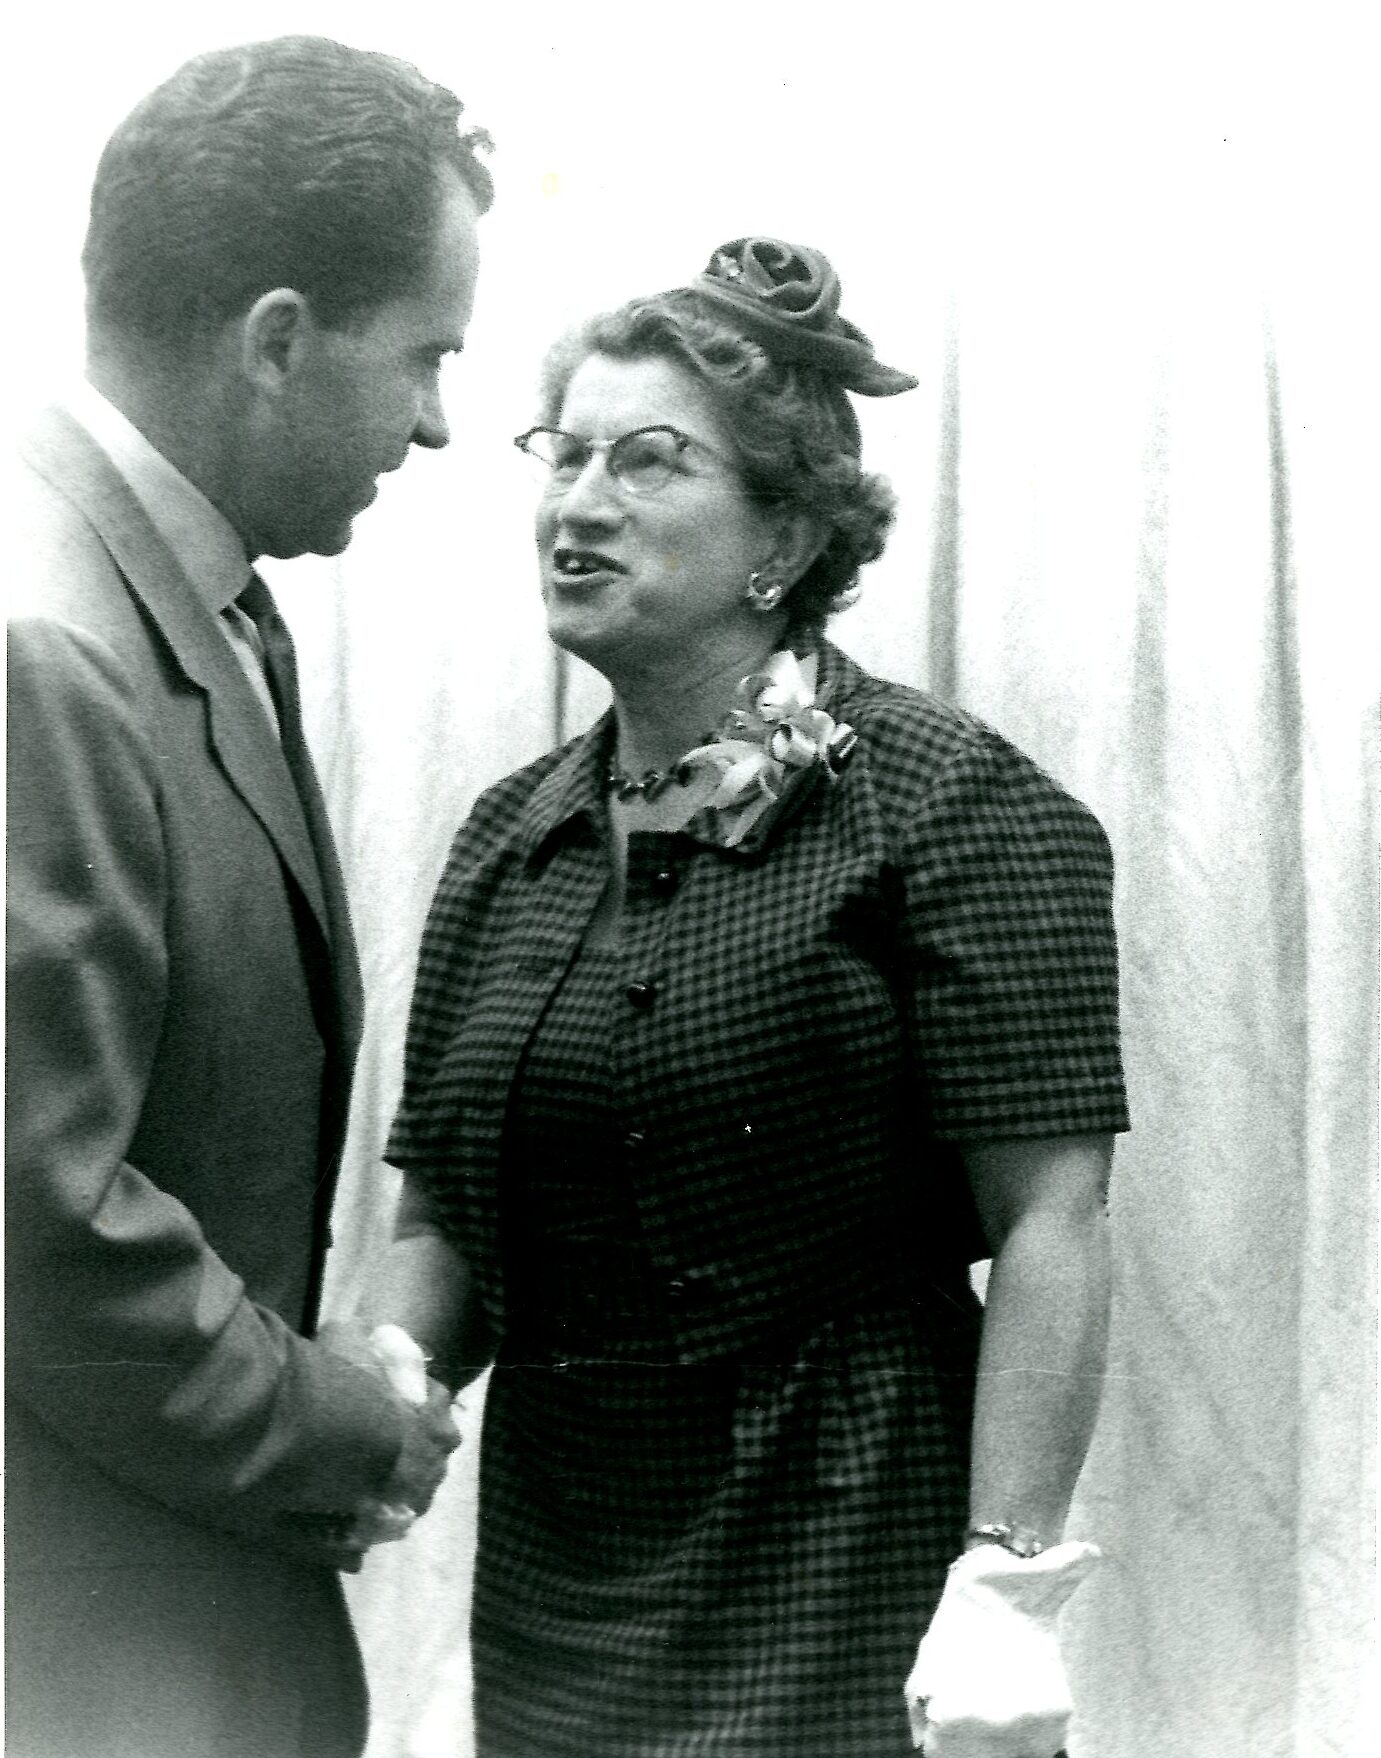 A photograph of Richard Nixon, visible in an obscured profile, stood shaking hands with Consuelo Northrop Bailey in front of a light-colored curtain. She appears to be speaking and he is gently smiling; they are both making eye contact with each other.